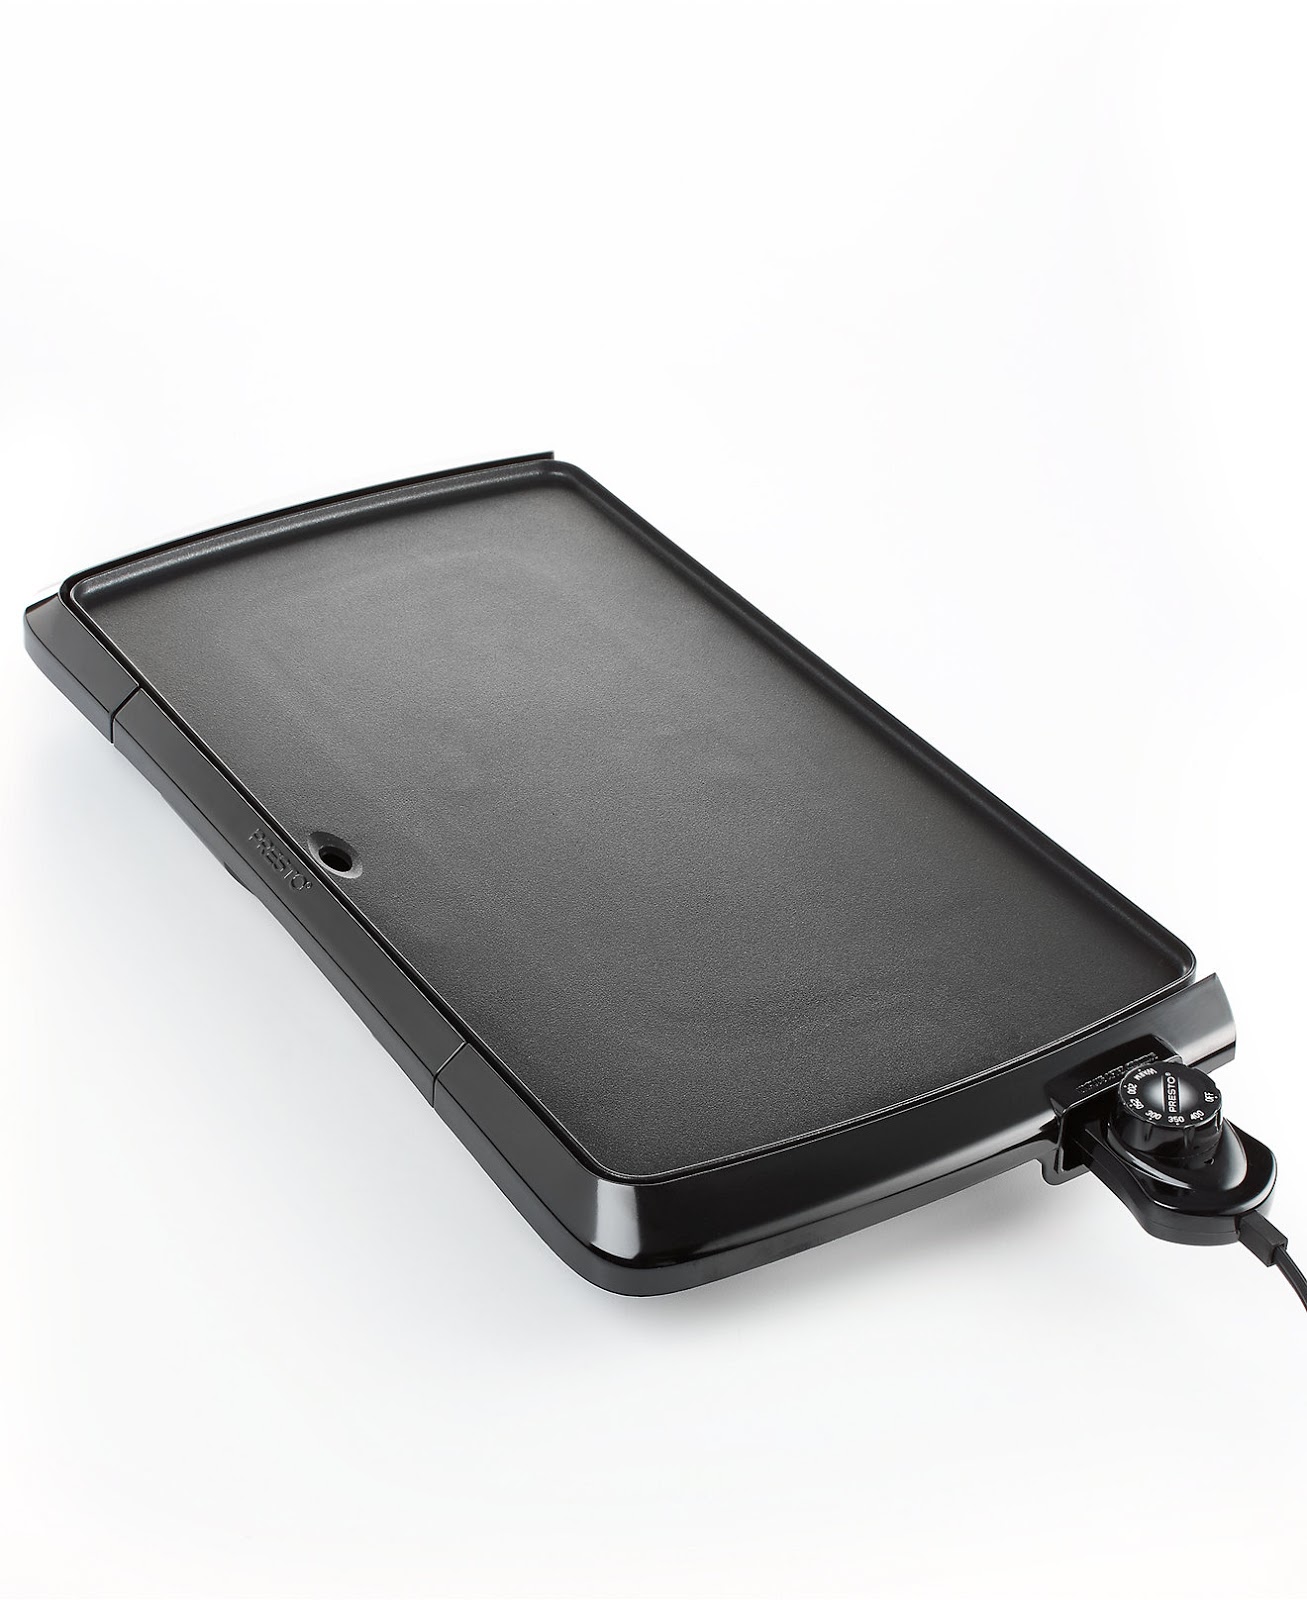 Presto Electric Griddle - The Benefits of Buying Electric Griddles